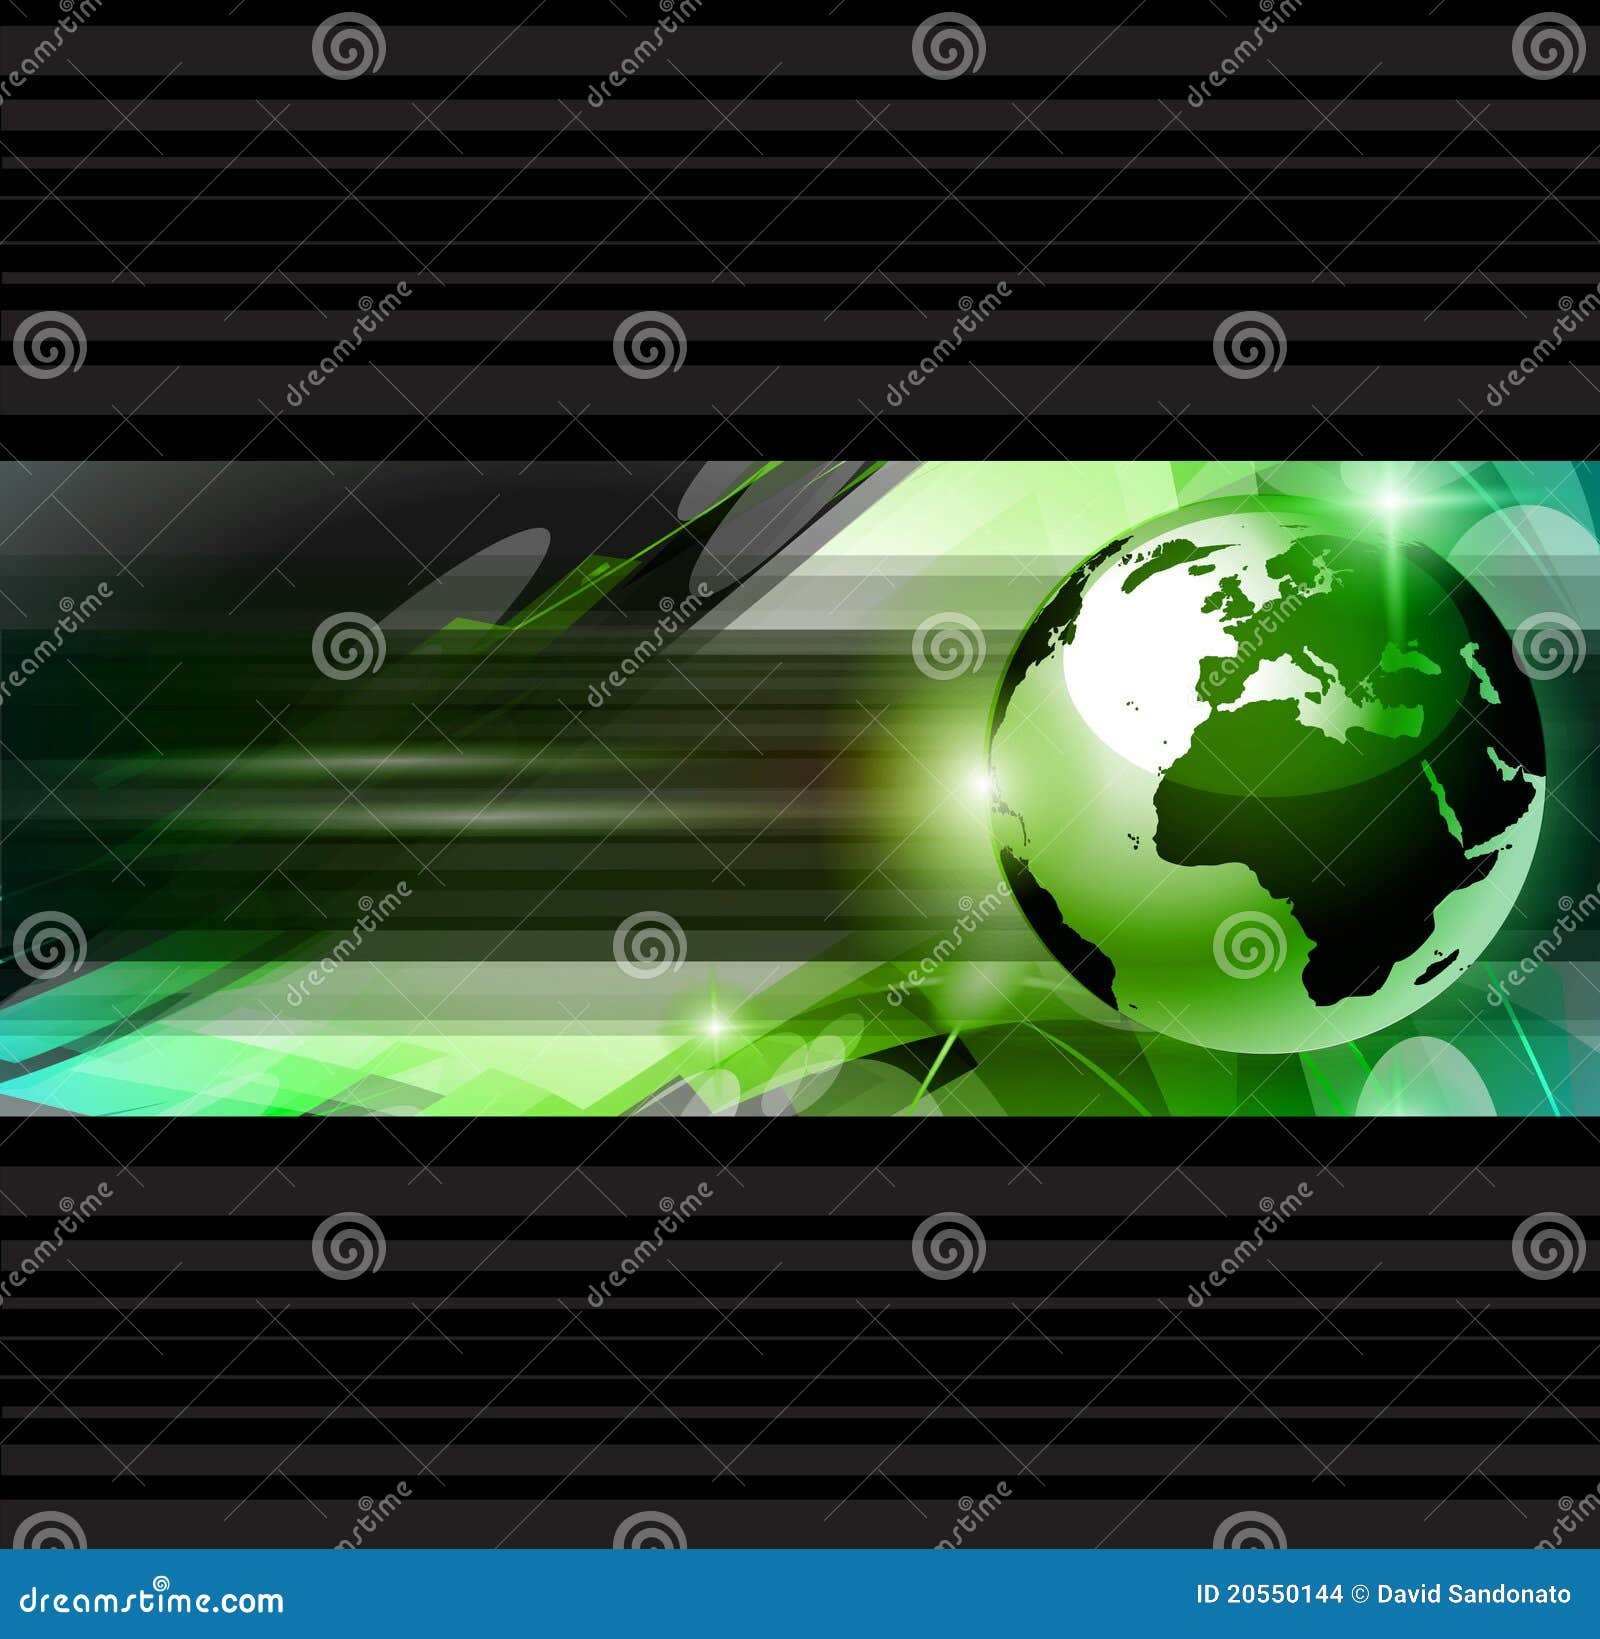 hitech abstract business background